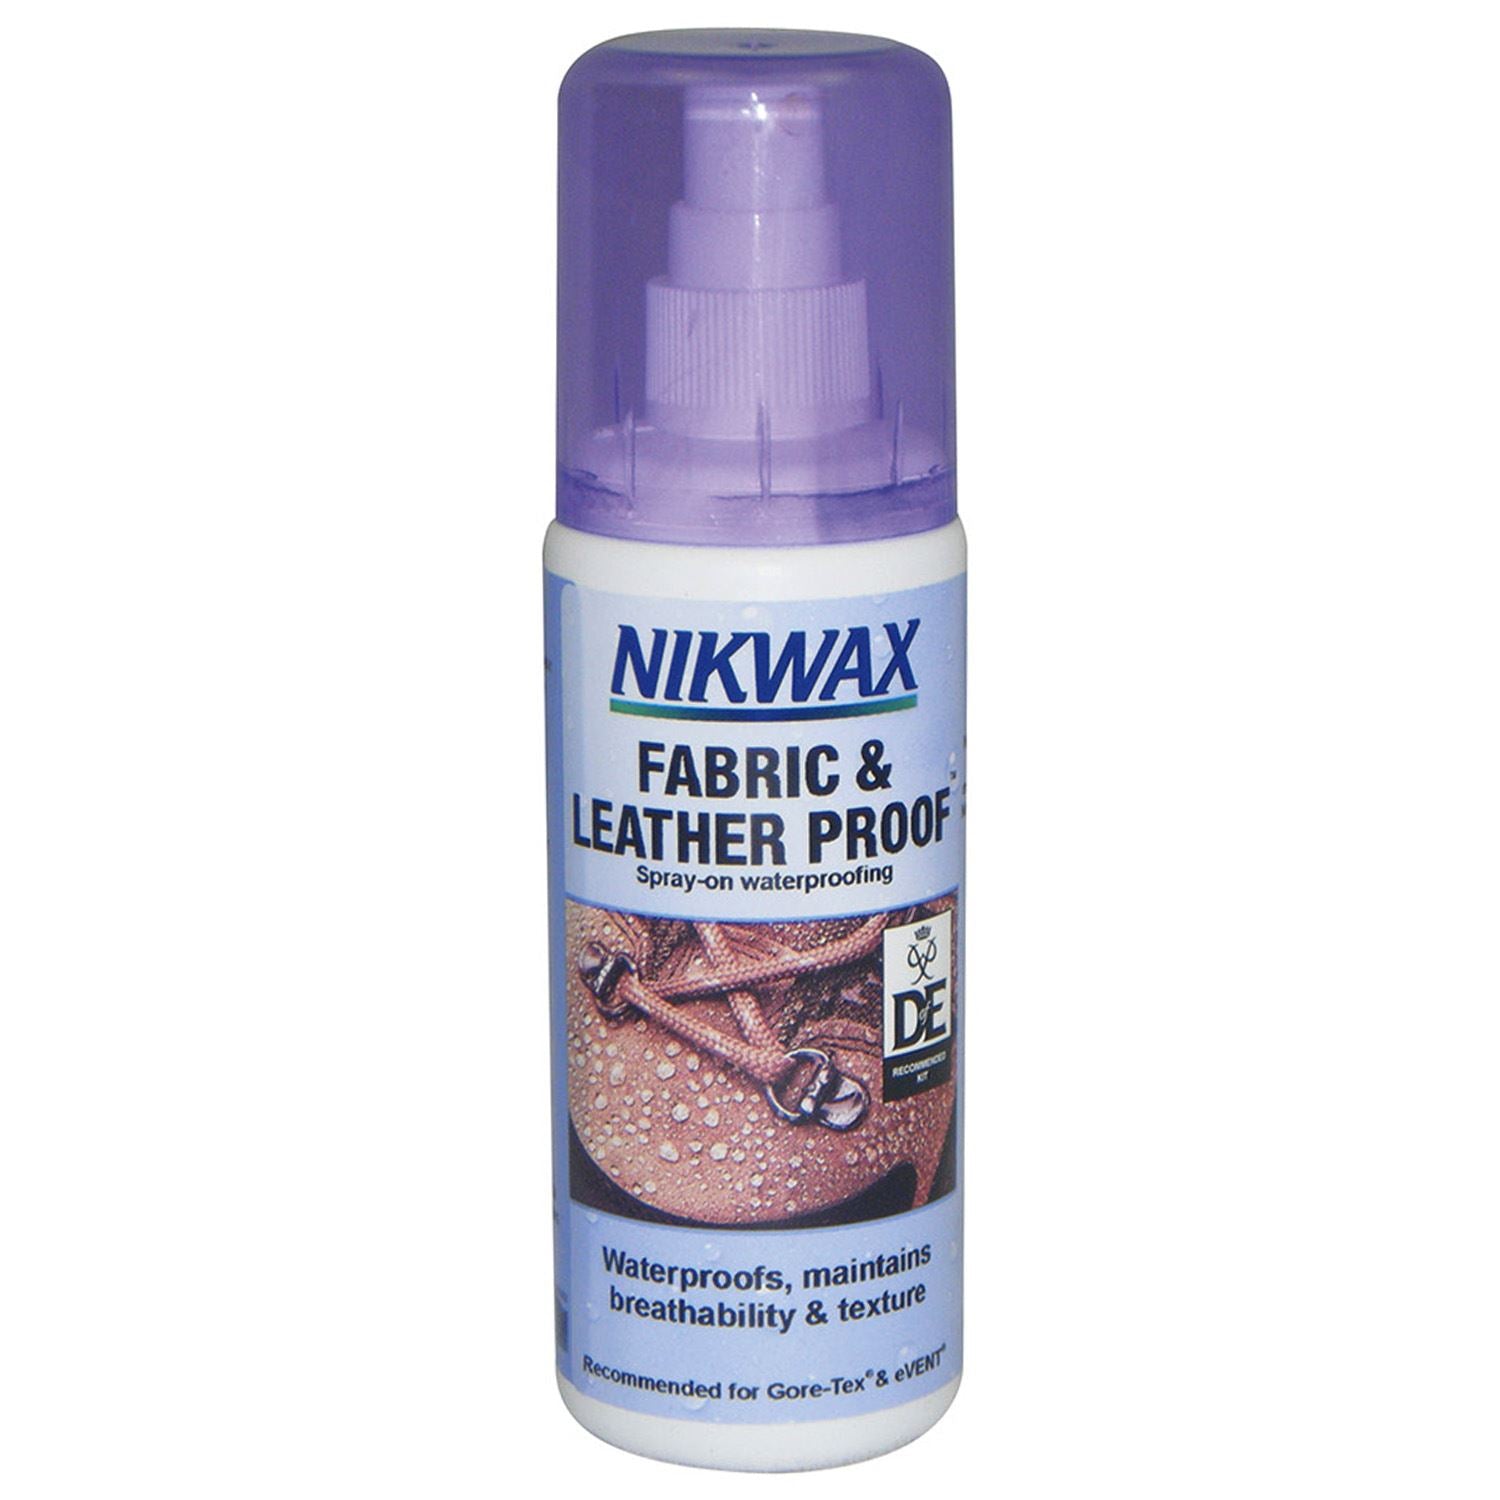 Nikwax Fabric & Leather Proof Spray - Just Horse Riders